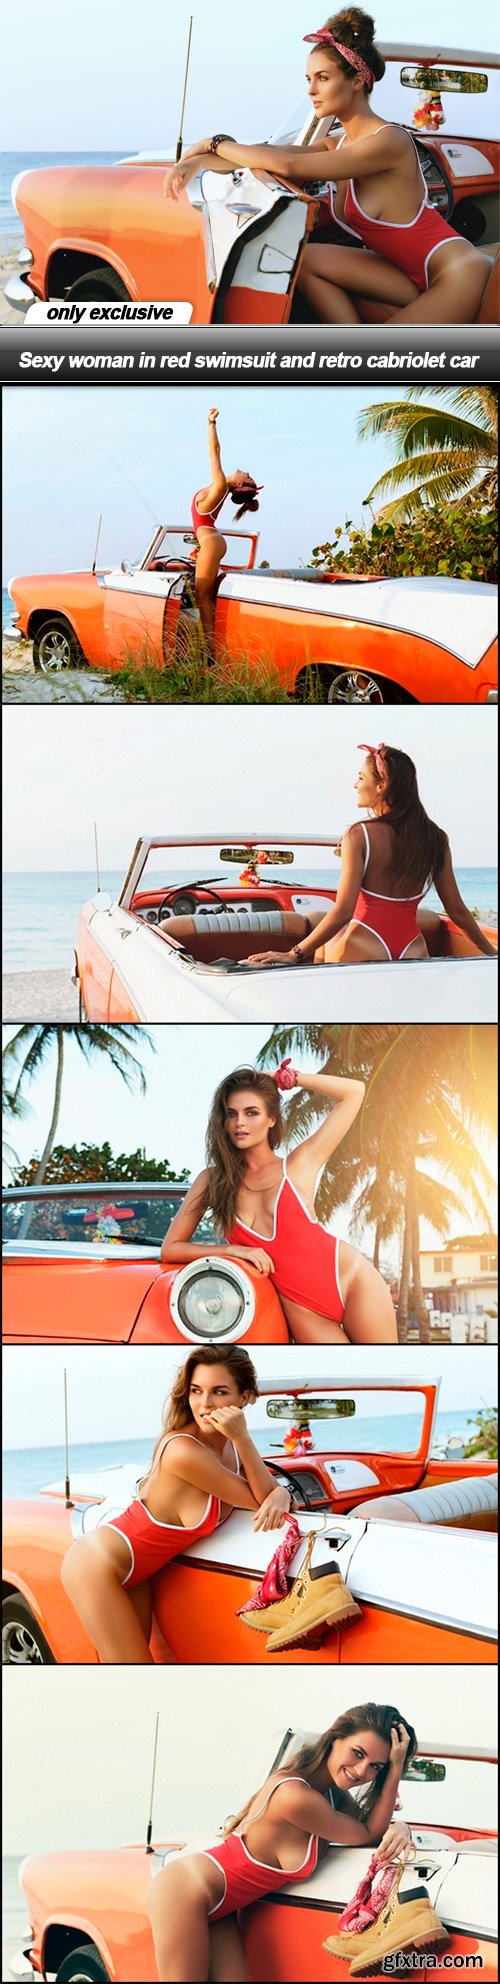 Sexy woman in red swimsuit and retro cabriolet car - 6 UHQ JPEG